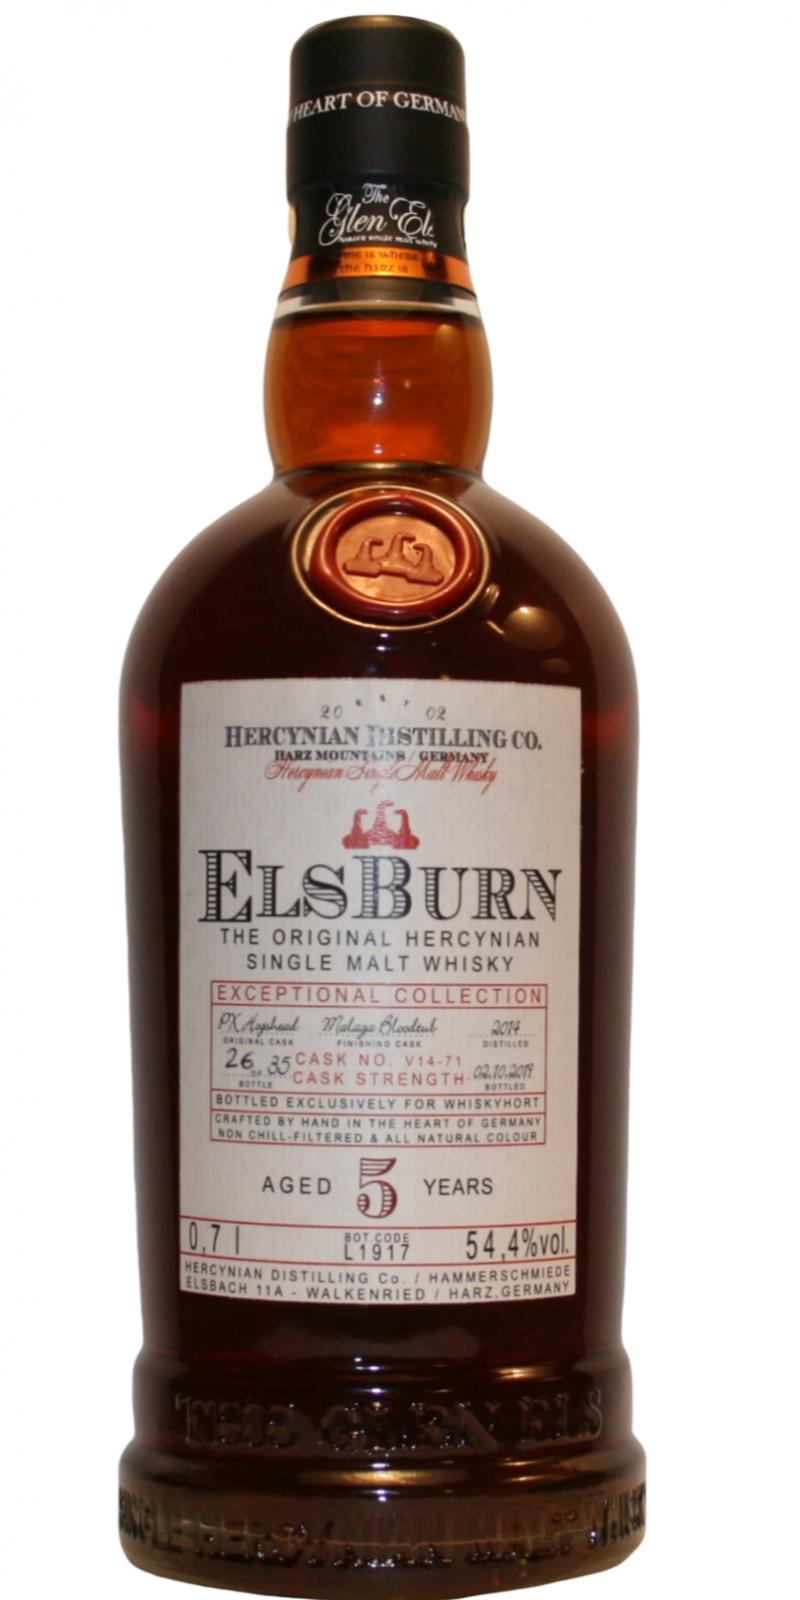 ElsBurn 2014 Exceptional Collection PX Hogshead & Malaga Bloodtub V14-71 Whiskyhort Exclusive 54.4% 700ml